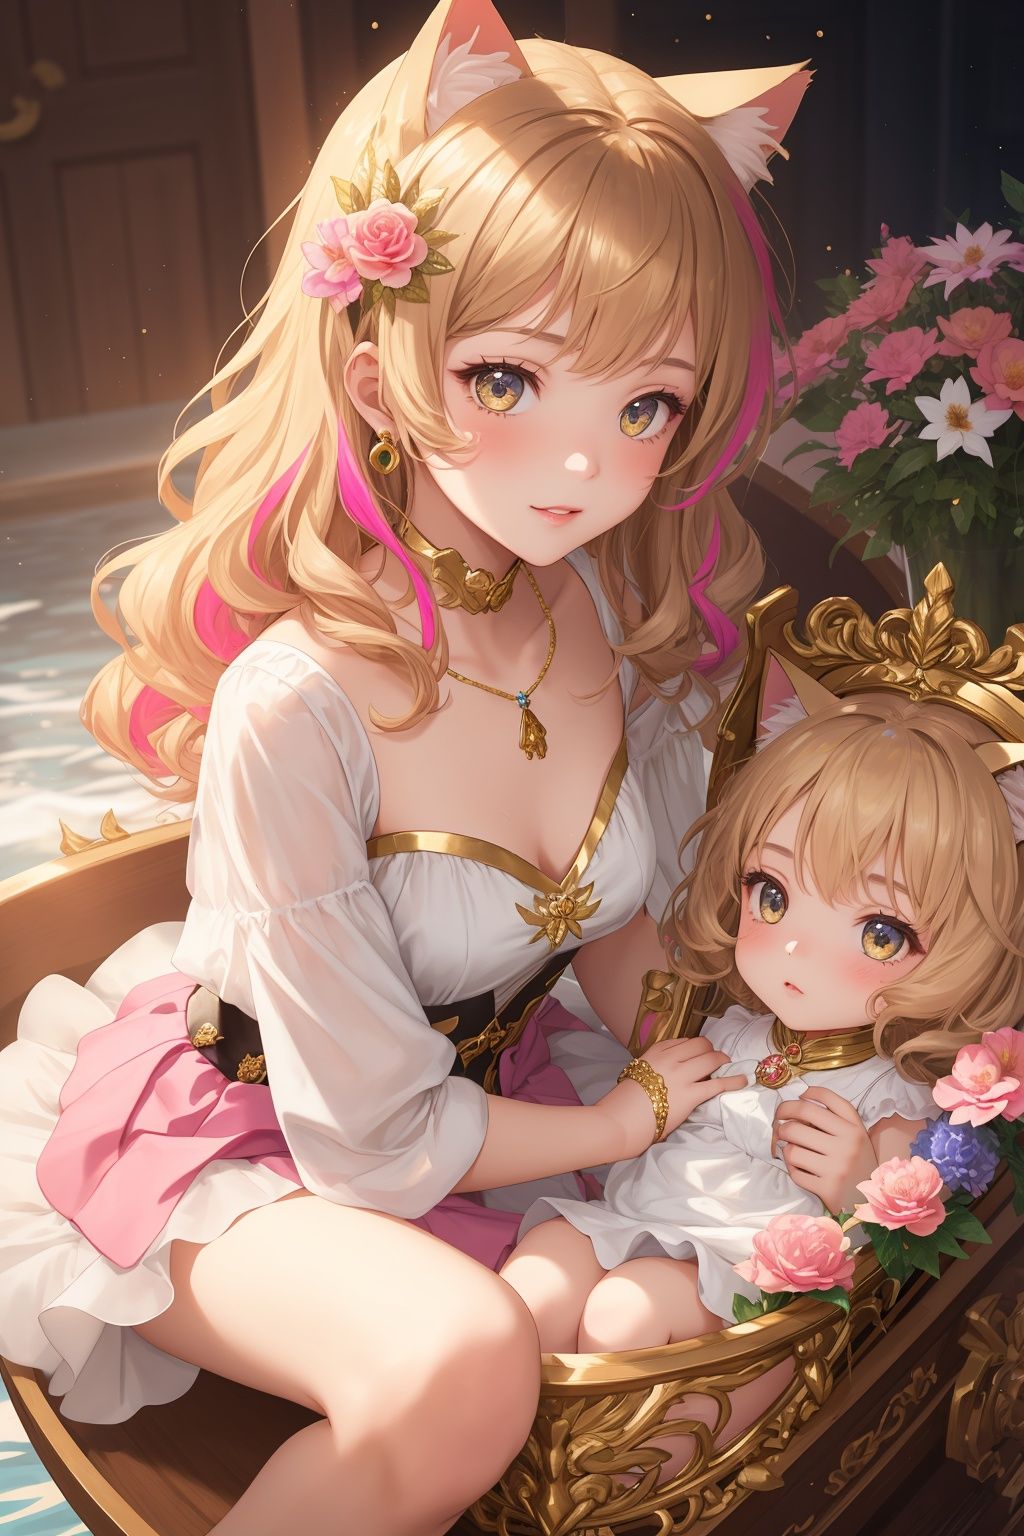  1girl, wearing a white tulle skirt with golden tassels, exquisite face, gold jewelry, gold decoration, black wavy hair, a pair of cat ears that can control water around her, dazzling and colorful, extremely cute, sitting in a cradle full of flowers,Pink Mecha